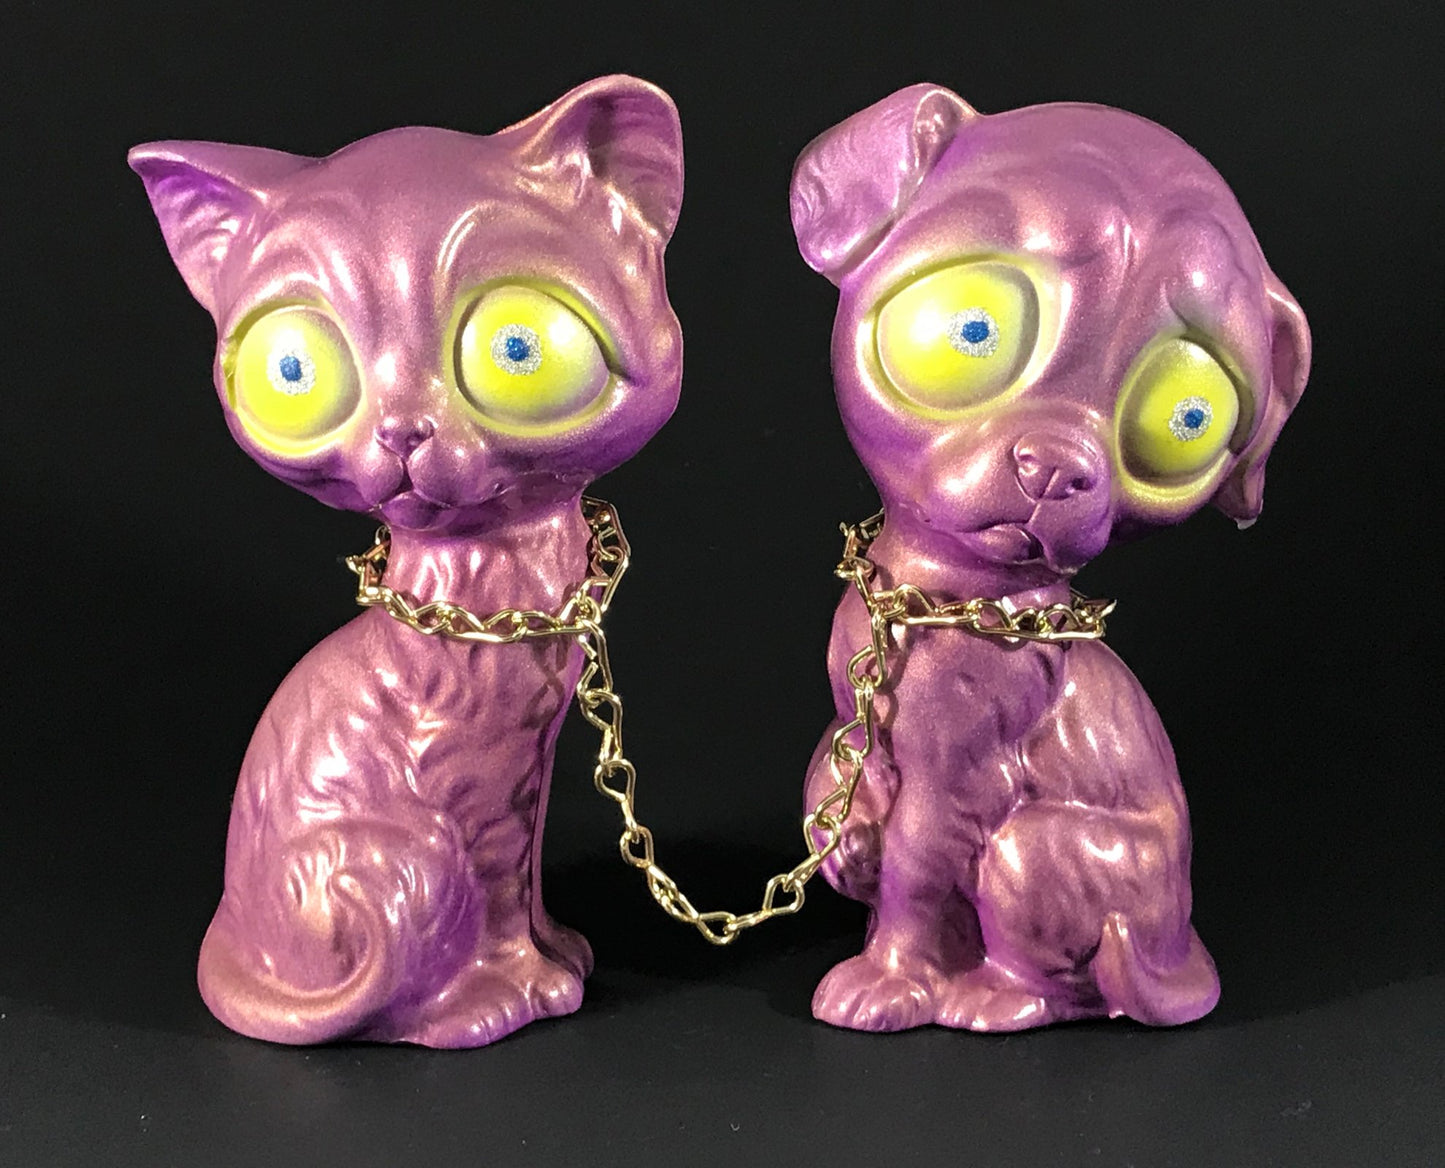 Chained sad dog and sad cat, iridescent purple/gold with metal flake/glitter eyes